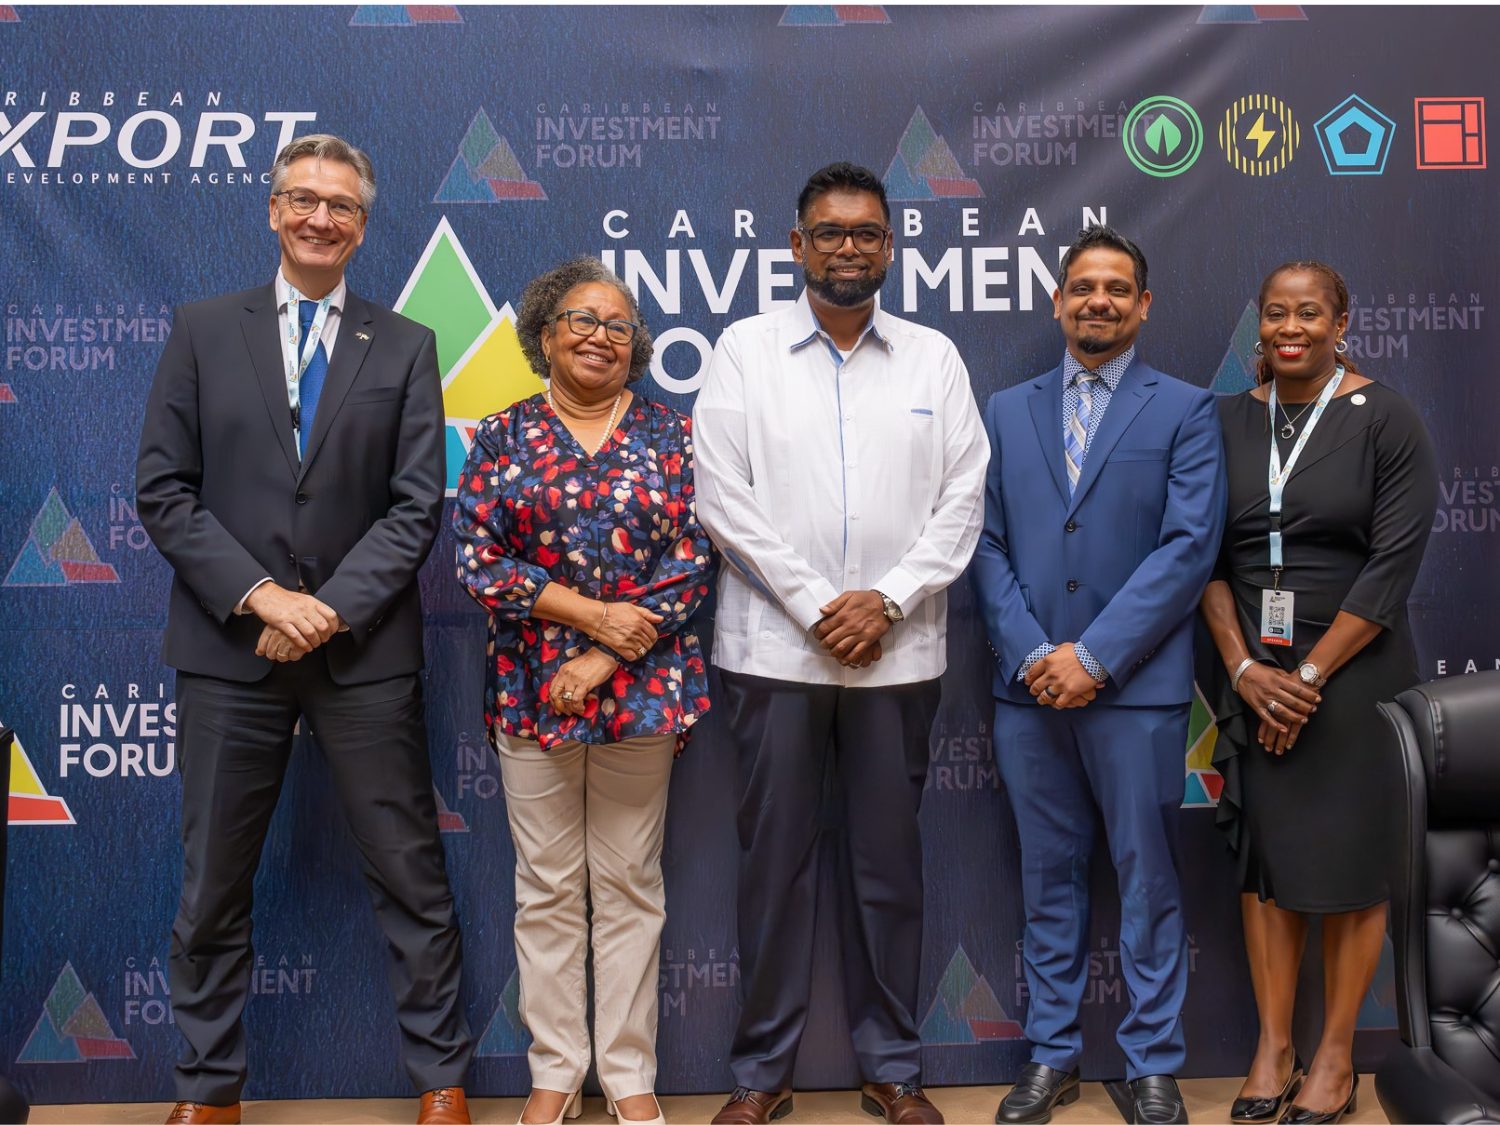 Caribbean Investment Forum continues to create opportunities for more investment in the Region.